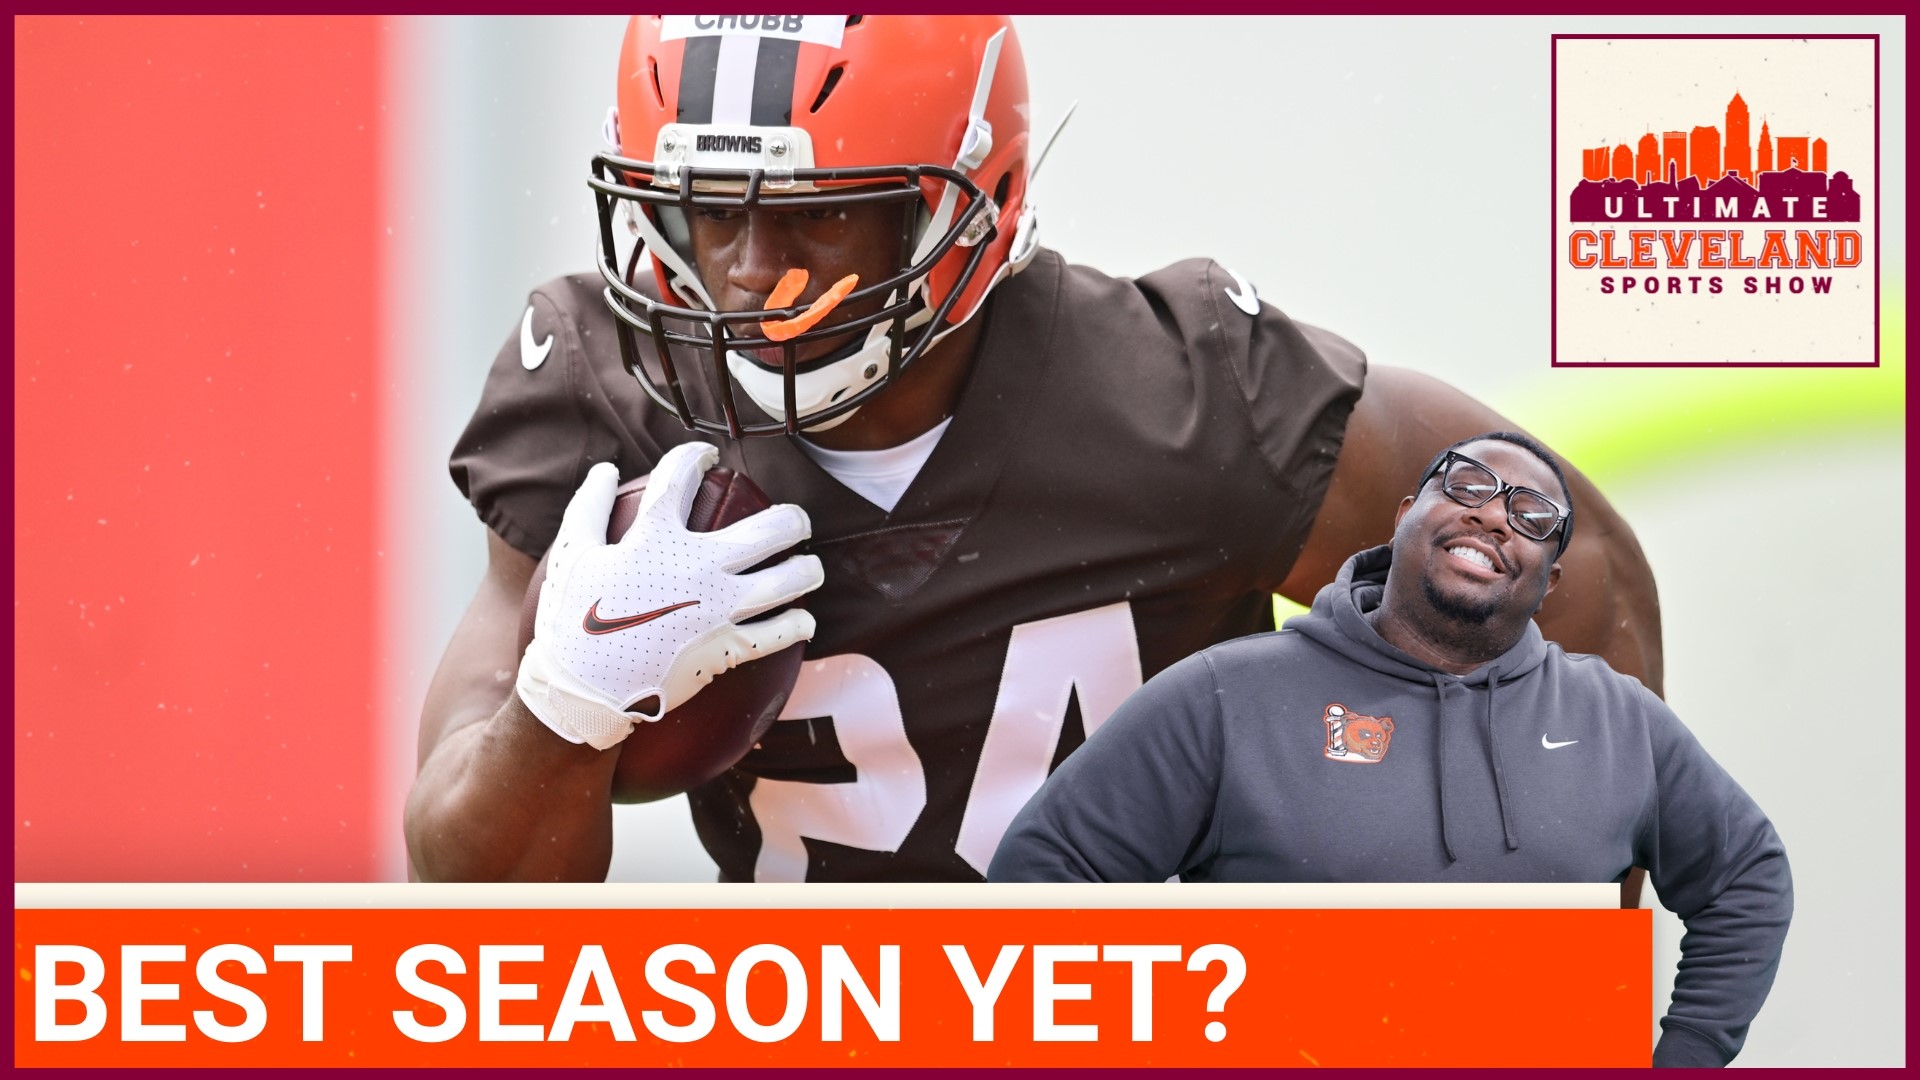 Could the possibility of having Deshaun Watson under center for the Cleveland Browns allow for Nick Chubb to have his best running season yet?